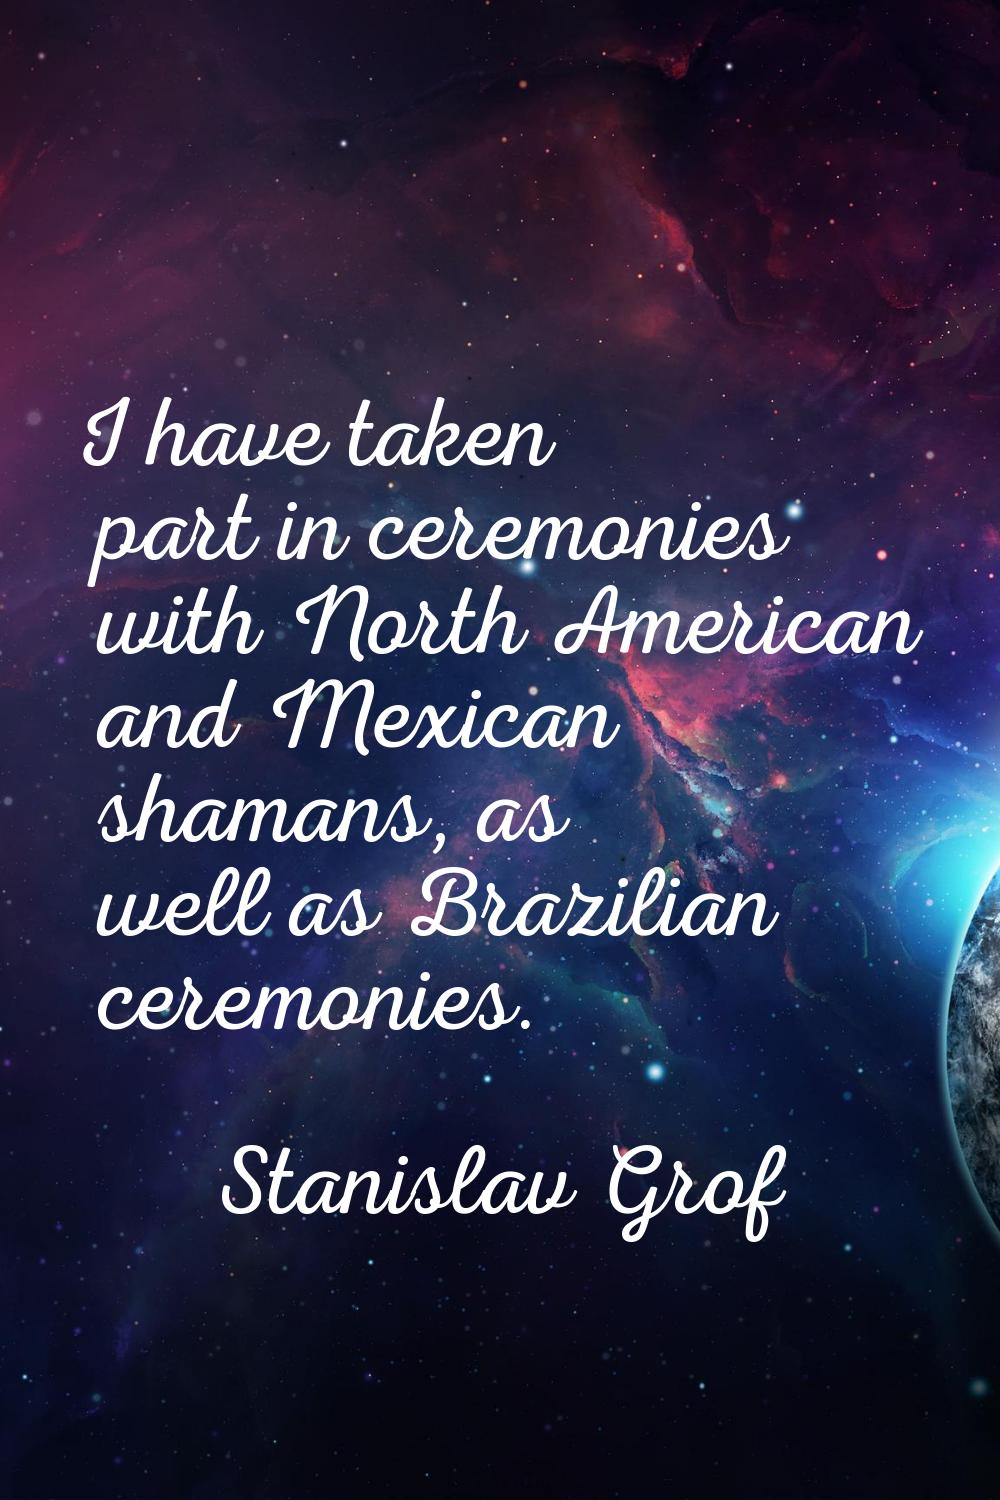 I have taken part in ceremonies with North American and Mexican shamans, as well as Brazilian cerem